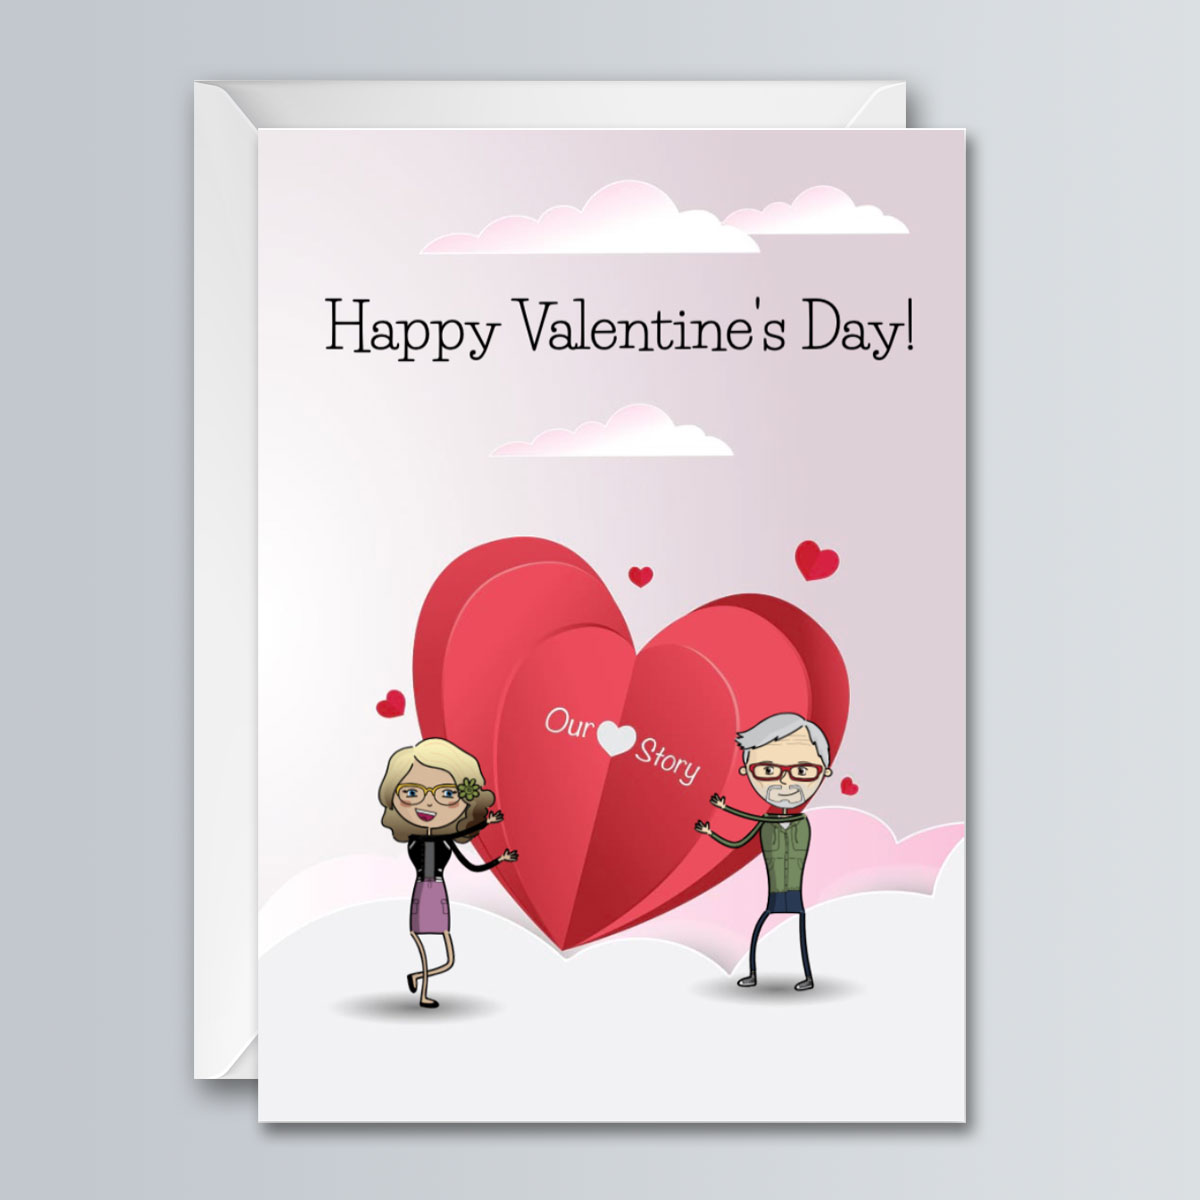 Our Story Heart - Valentine's Day - Greeting Card